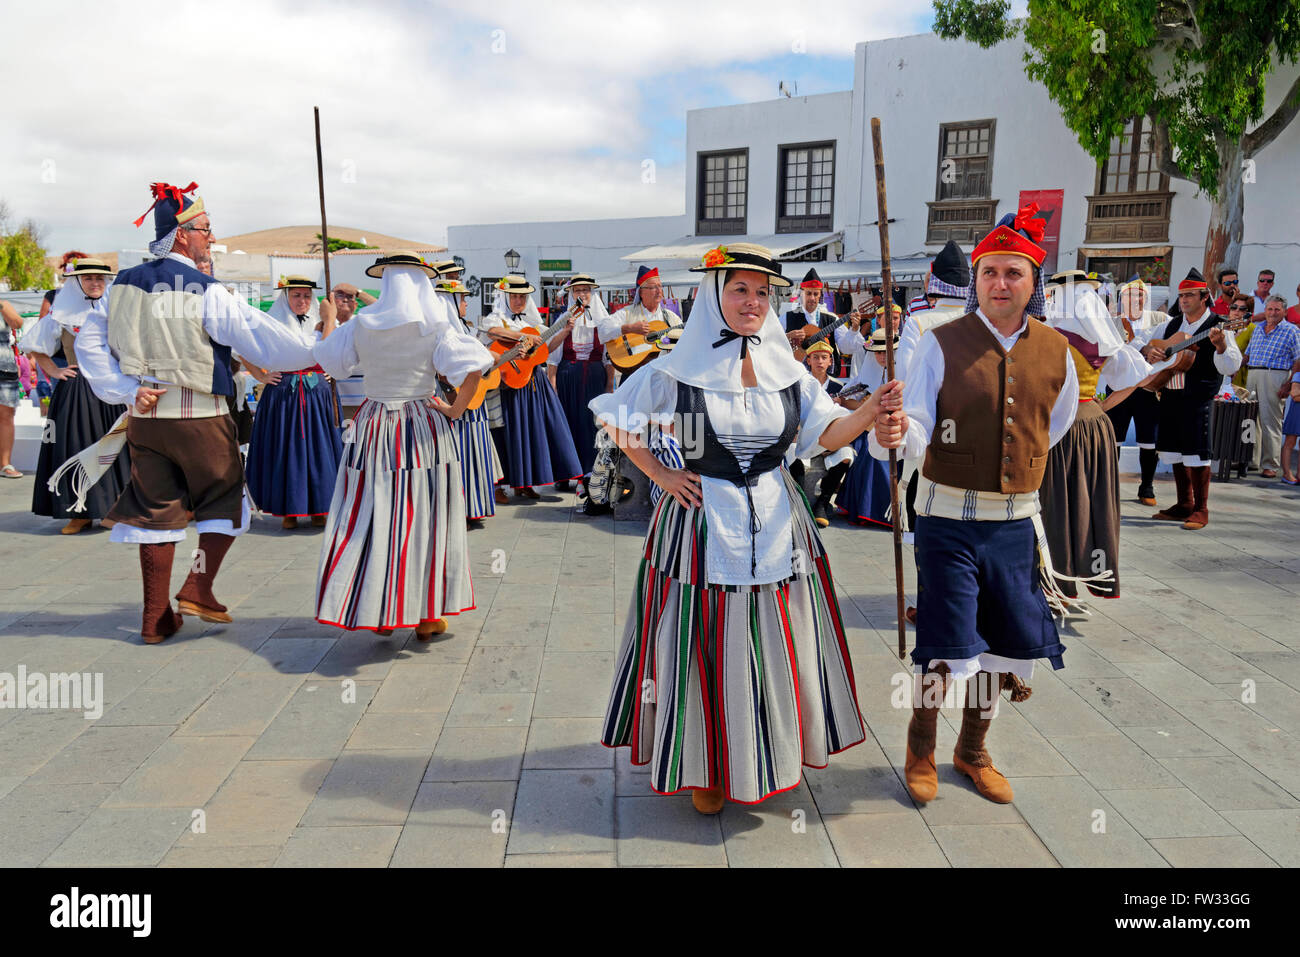 Canary folklore group dance performance, Teguise, Lanzarote, Canary Island, Spain Stock Photo